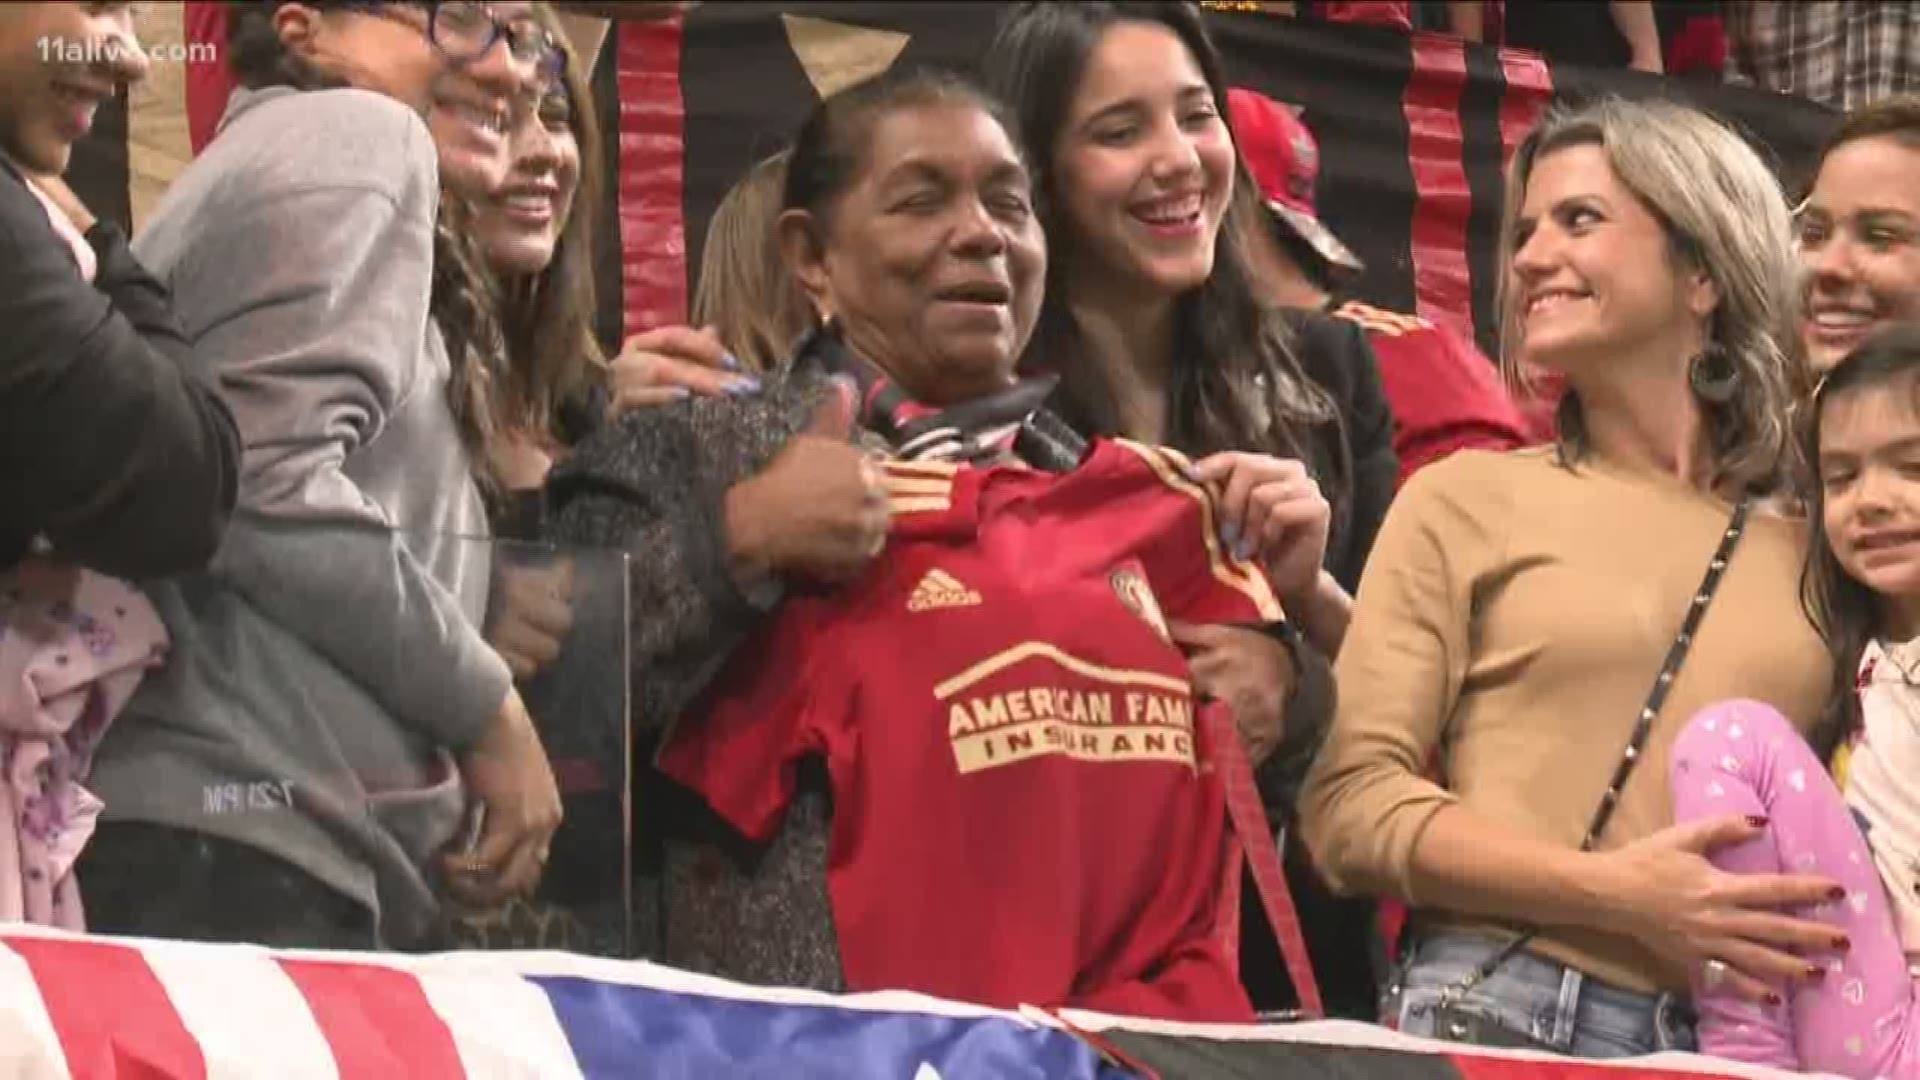 The heartwarming moment happened after Atlanta United's win on Sunday.